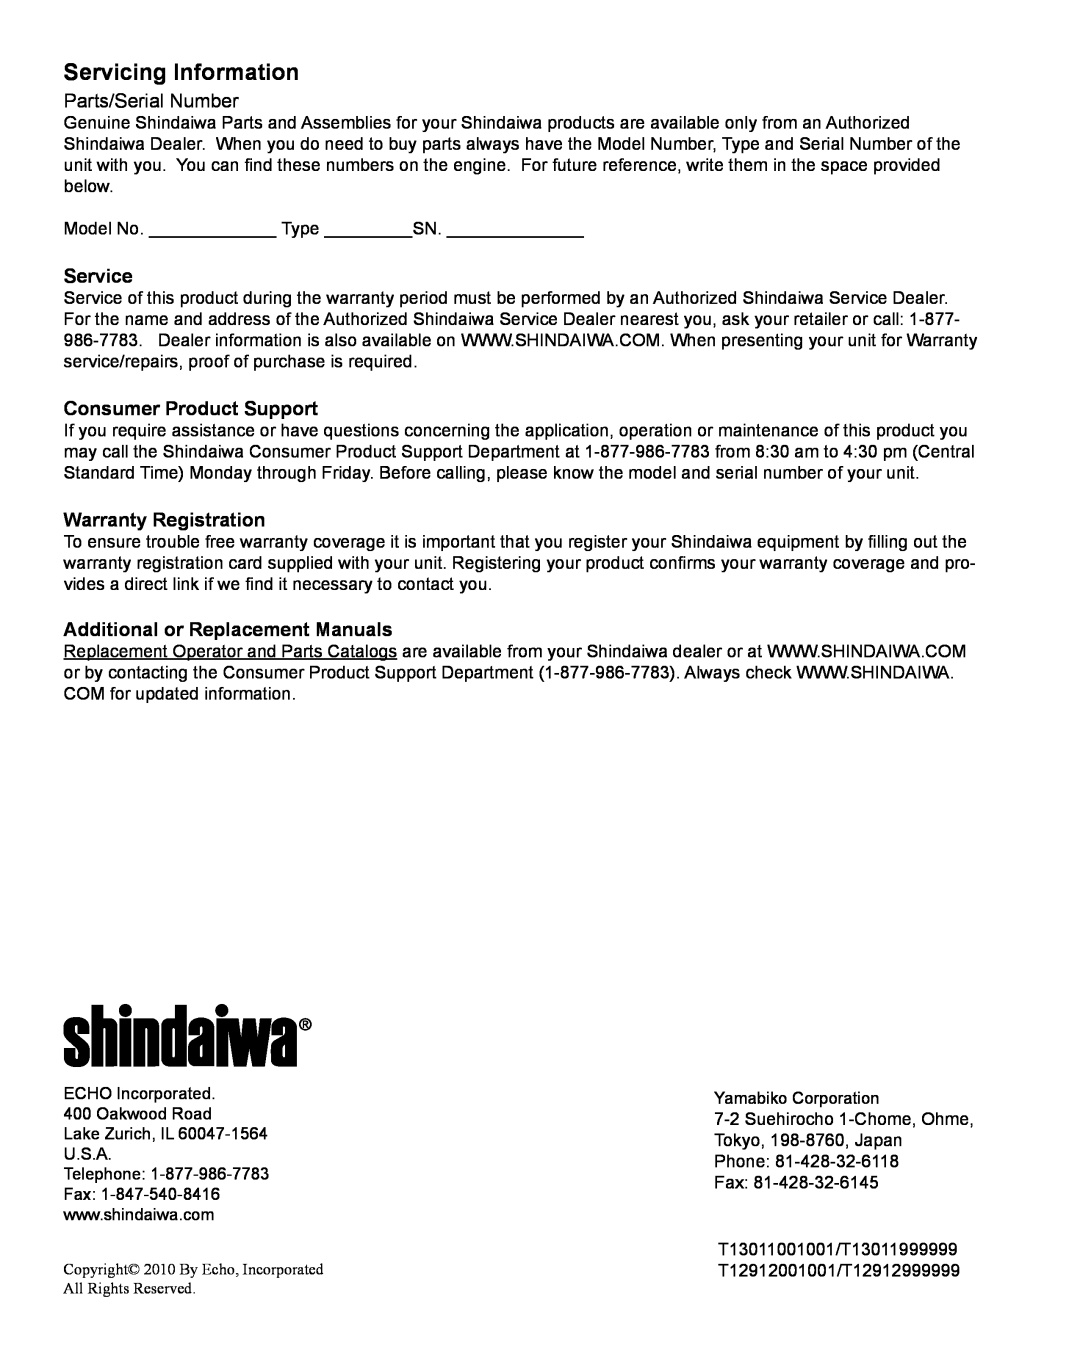 Shindaiwa M254 manual Servicing Information, Service, Consumer Product Support, Warranty Registration, Parts/Serial Number 